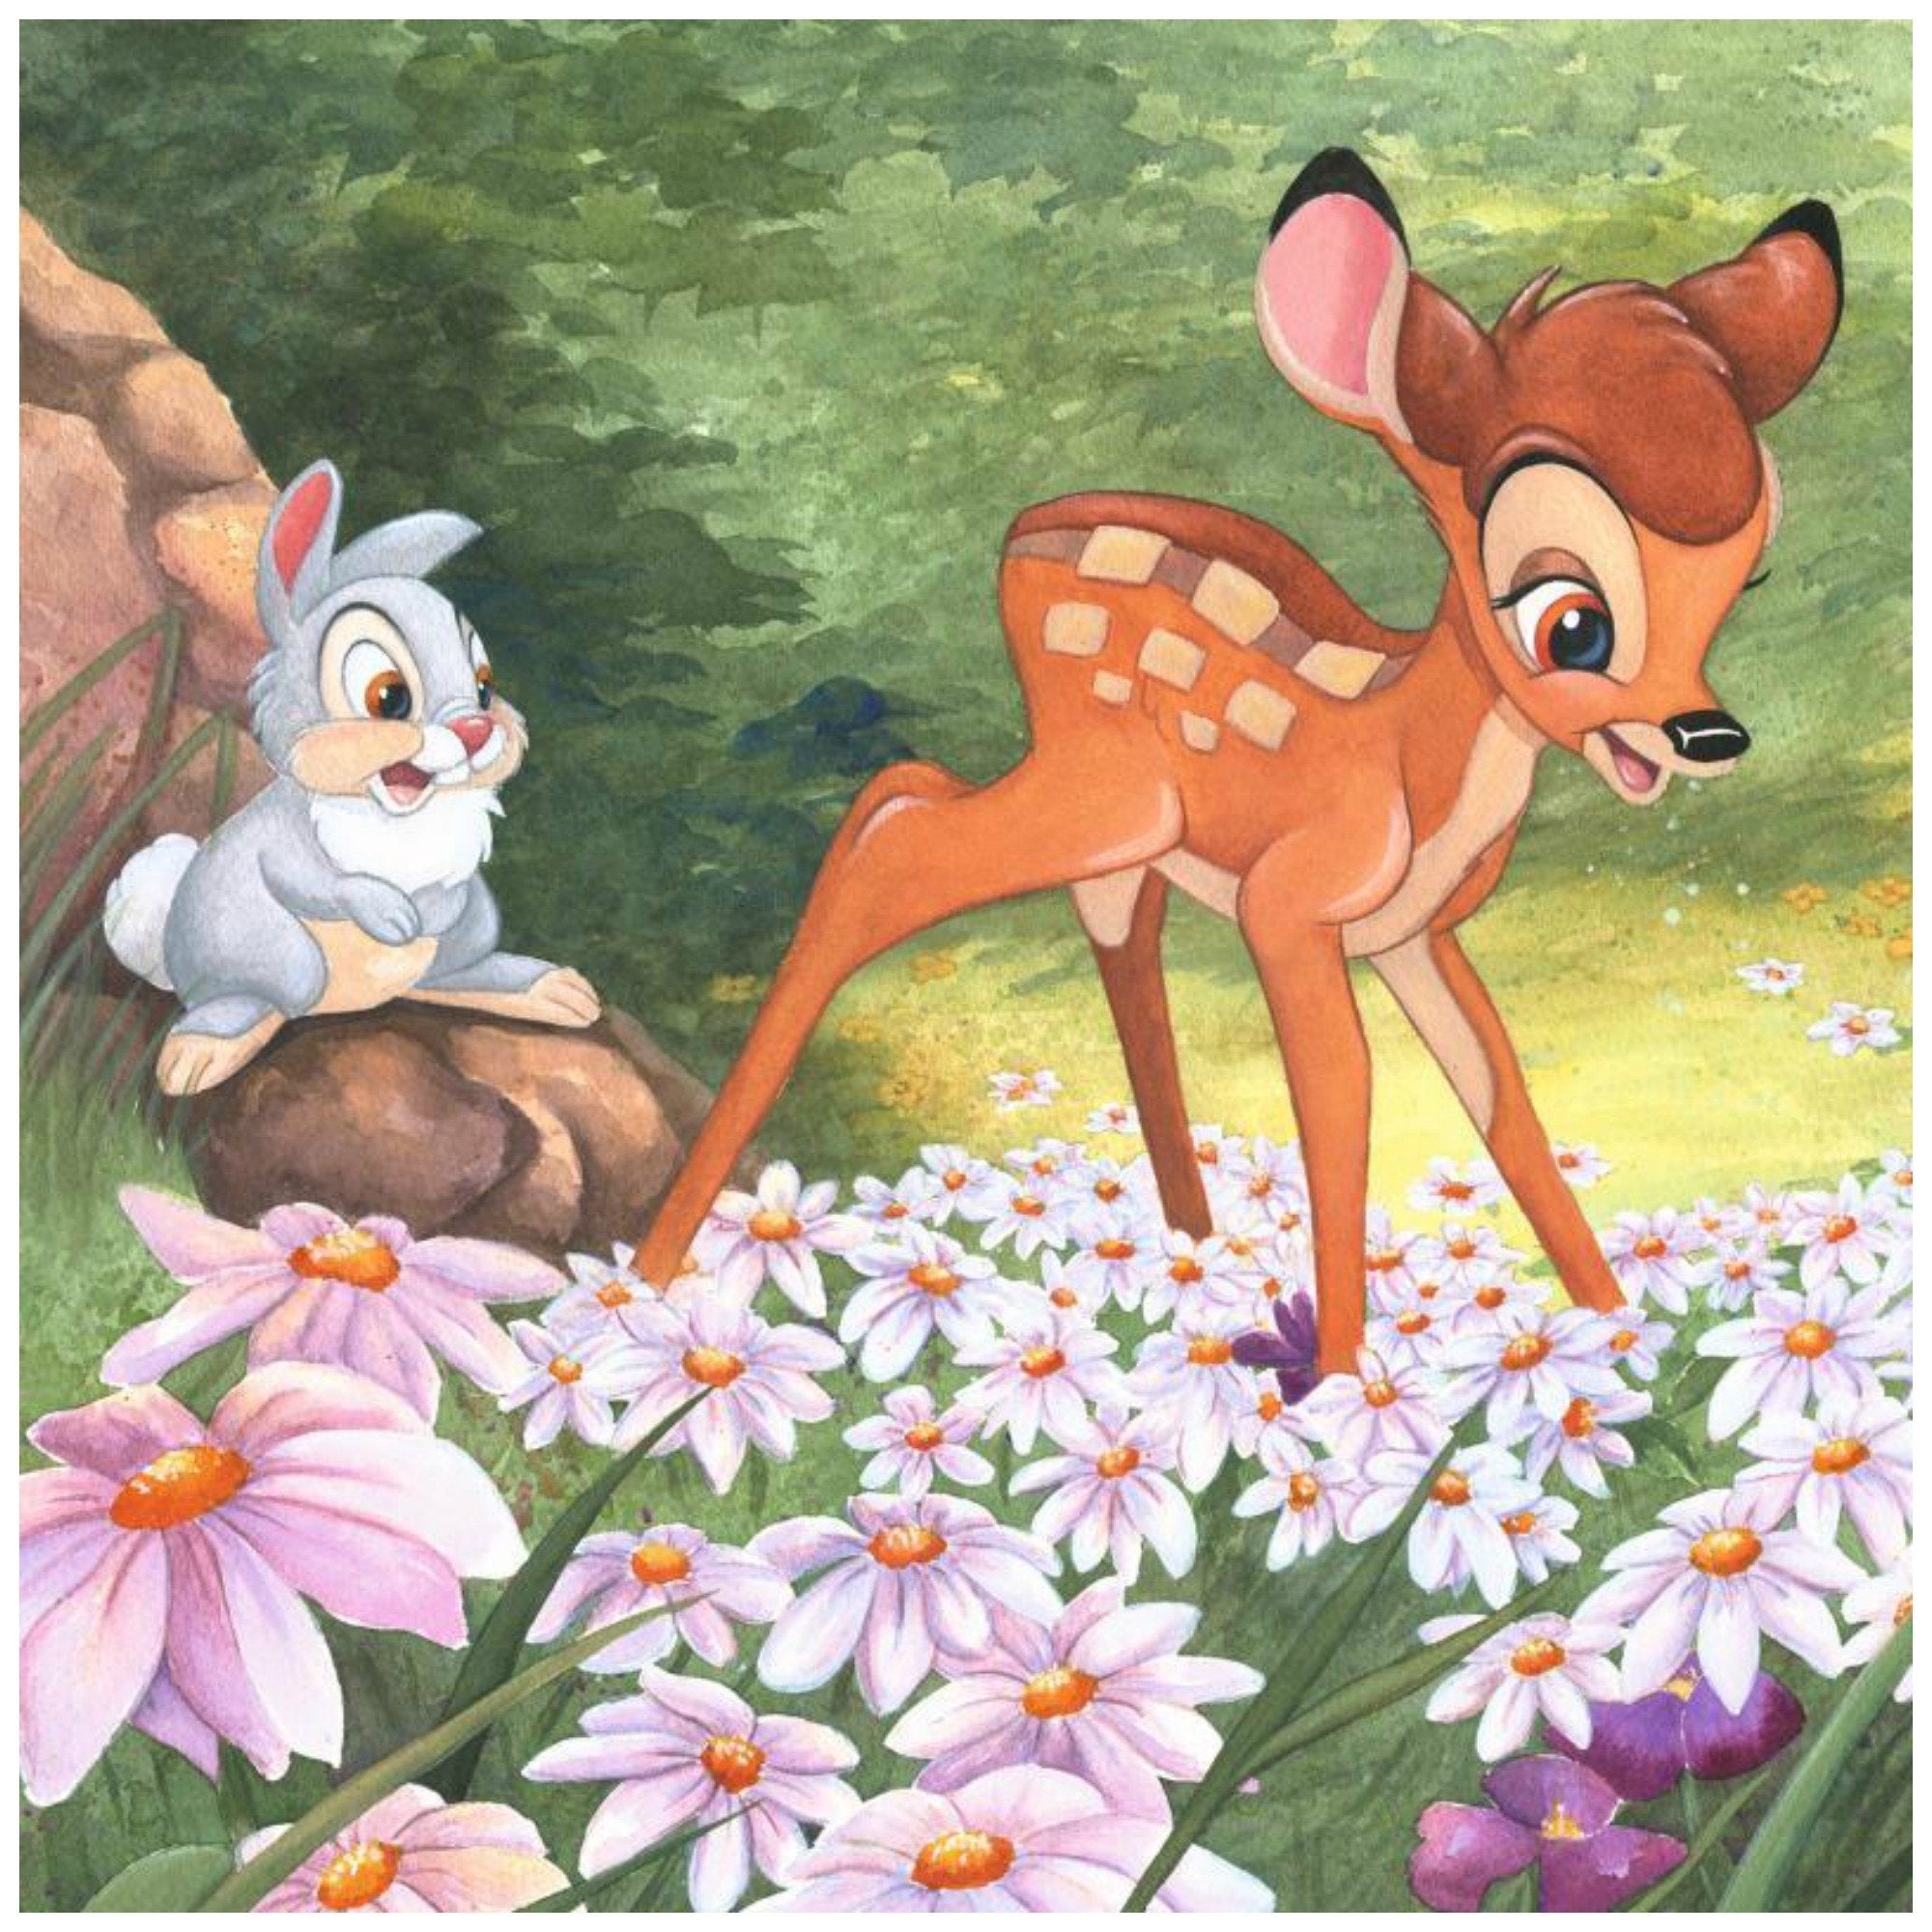 The Joy a Flowers Brings by Michelle St. Laurent.  Bambi and his friends Trumper and Flower play in a wooden area covered with flowers - closeup